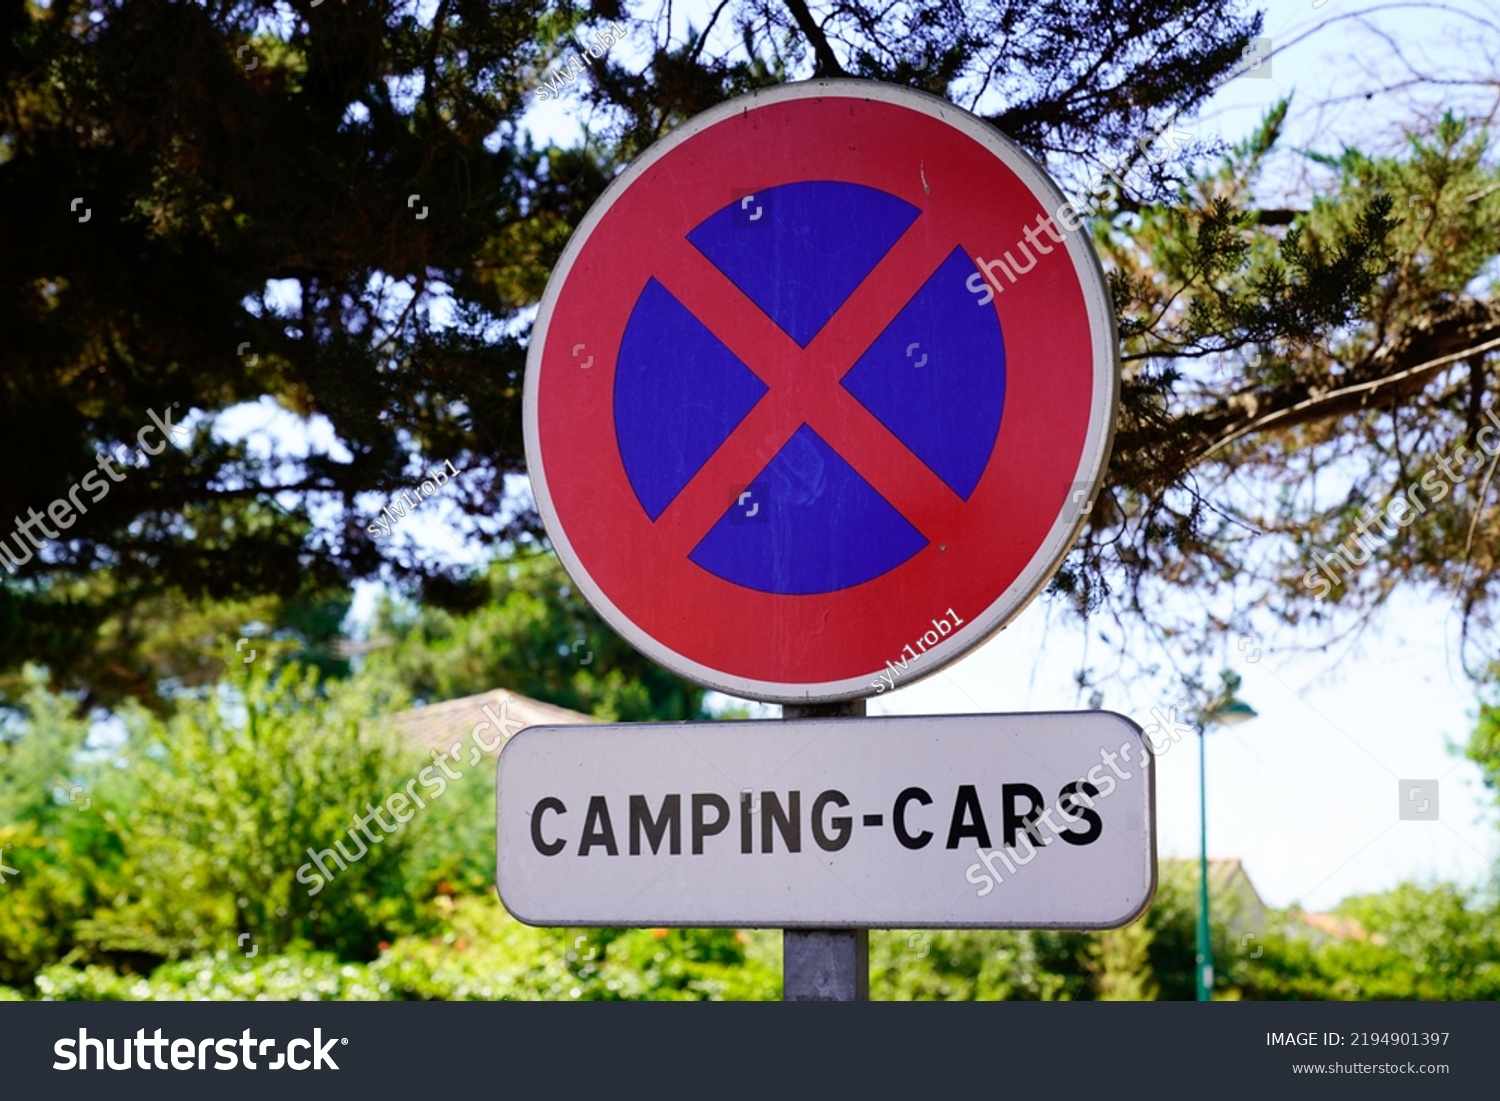 panel road sign text camping car no campervan motorhome parking prohibited recreational vehicule rv symbol ban red blue round prohibition sign #2194901397